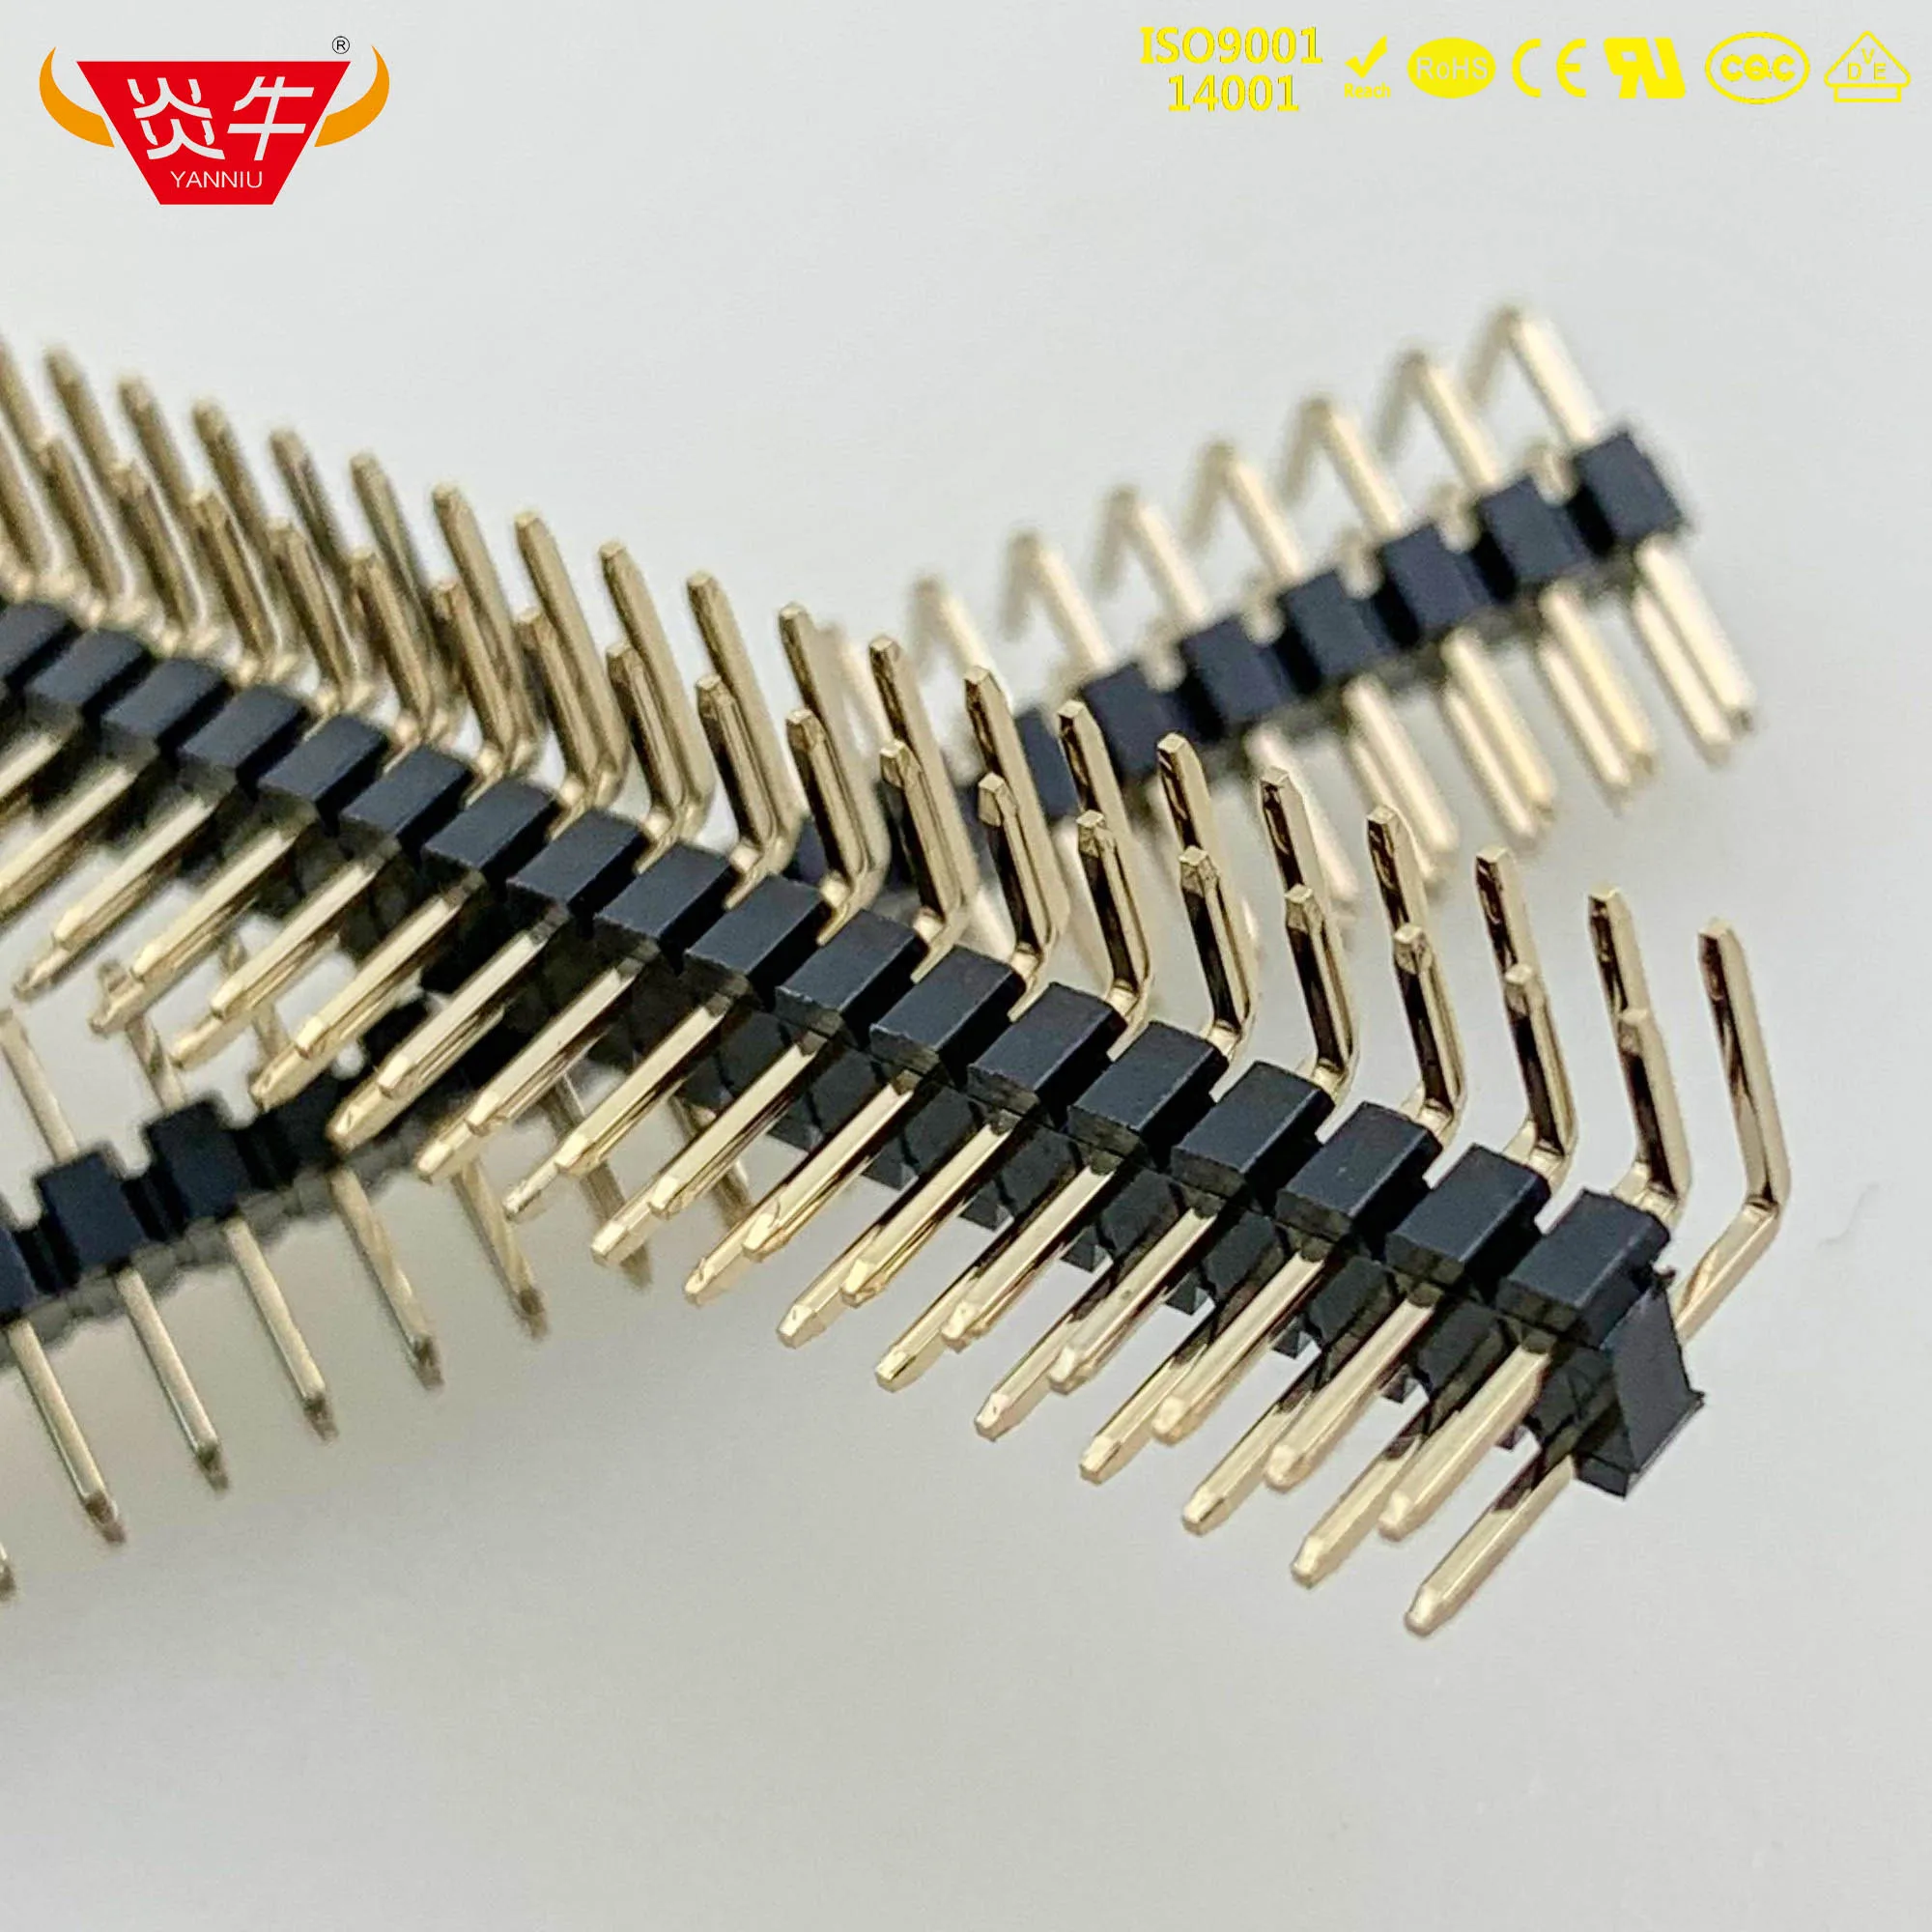 

50Pcs 2.0mm PITCH 2X40P 80PIN MALE STRIP CONNECTOR SOCKET DOUBLE ROW RIGHT ANGLE PIN HEADER HIGH TEMPERATURES GOLD-PLATED